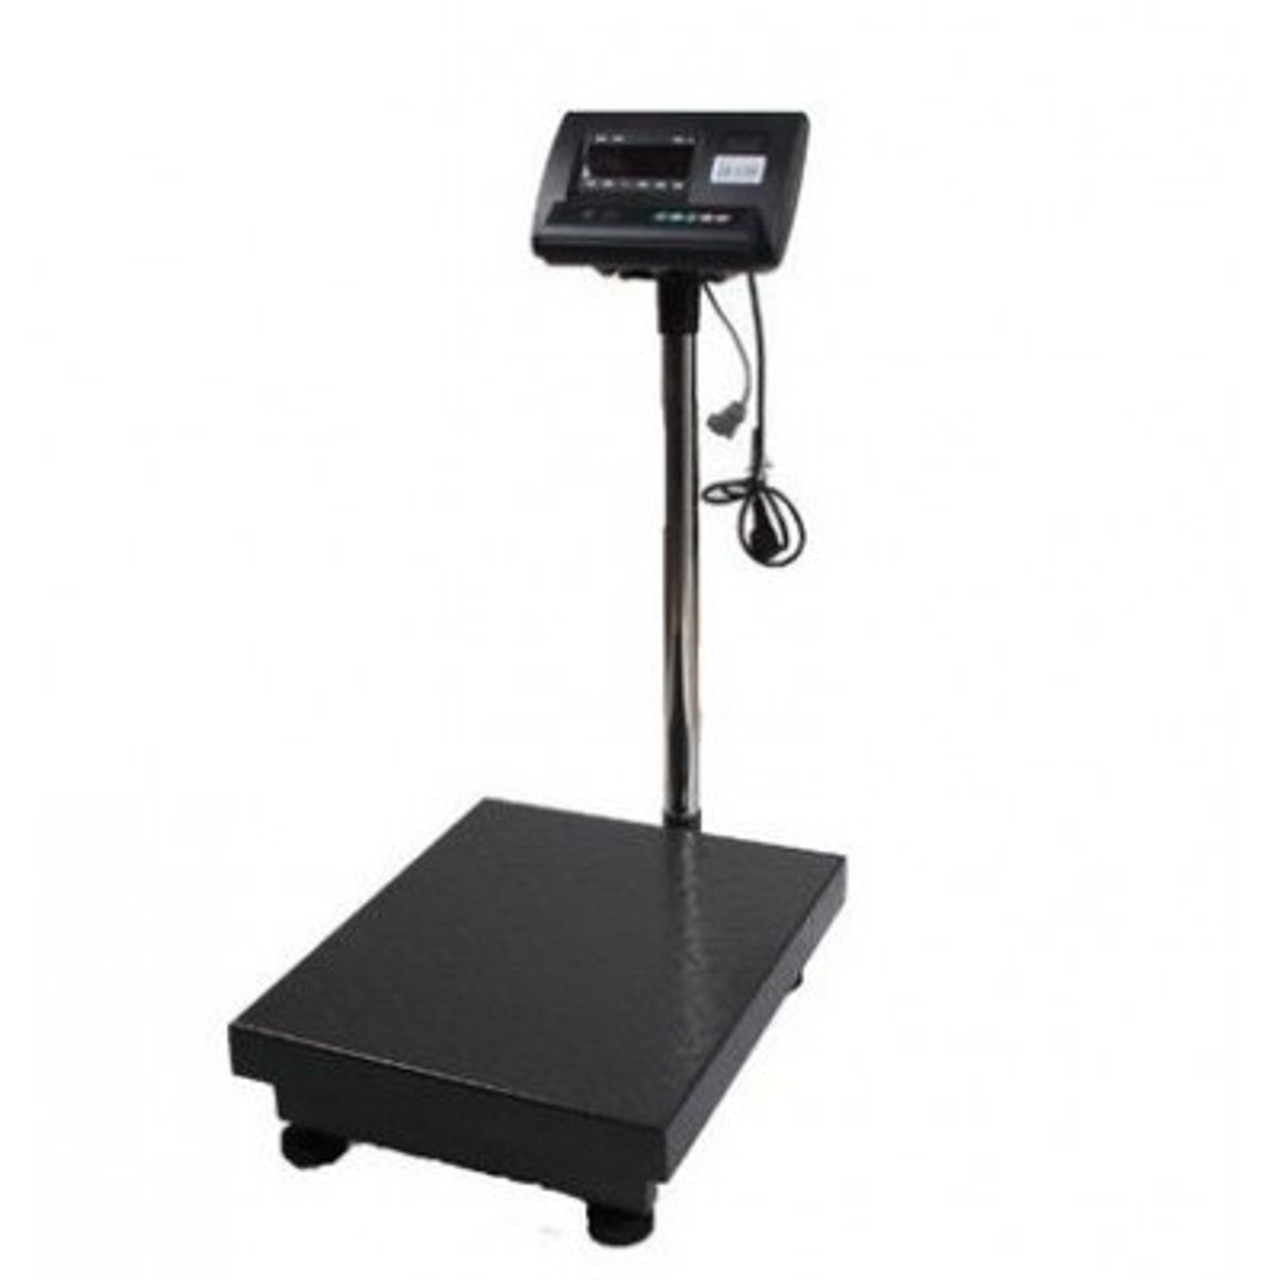 https://cdn11.bigcommerce.com/s-x3ki4mm/images/stencil/1280x1280/products/2198/3076/Digital_Electronic_Weighing_Scale_A-12_-_300KG__67390.1570710528.jpg?c=2?imbypass=on